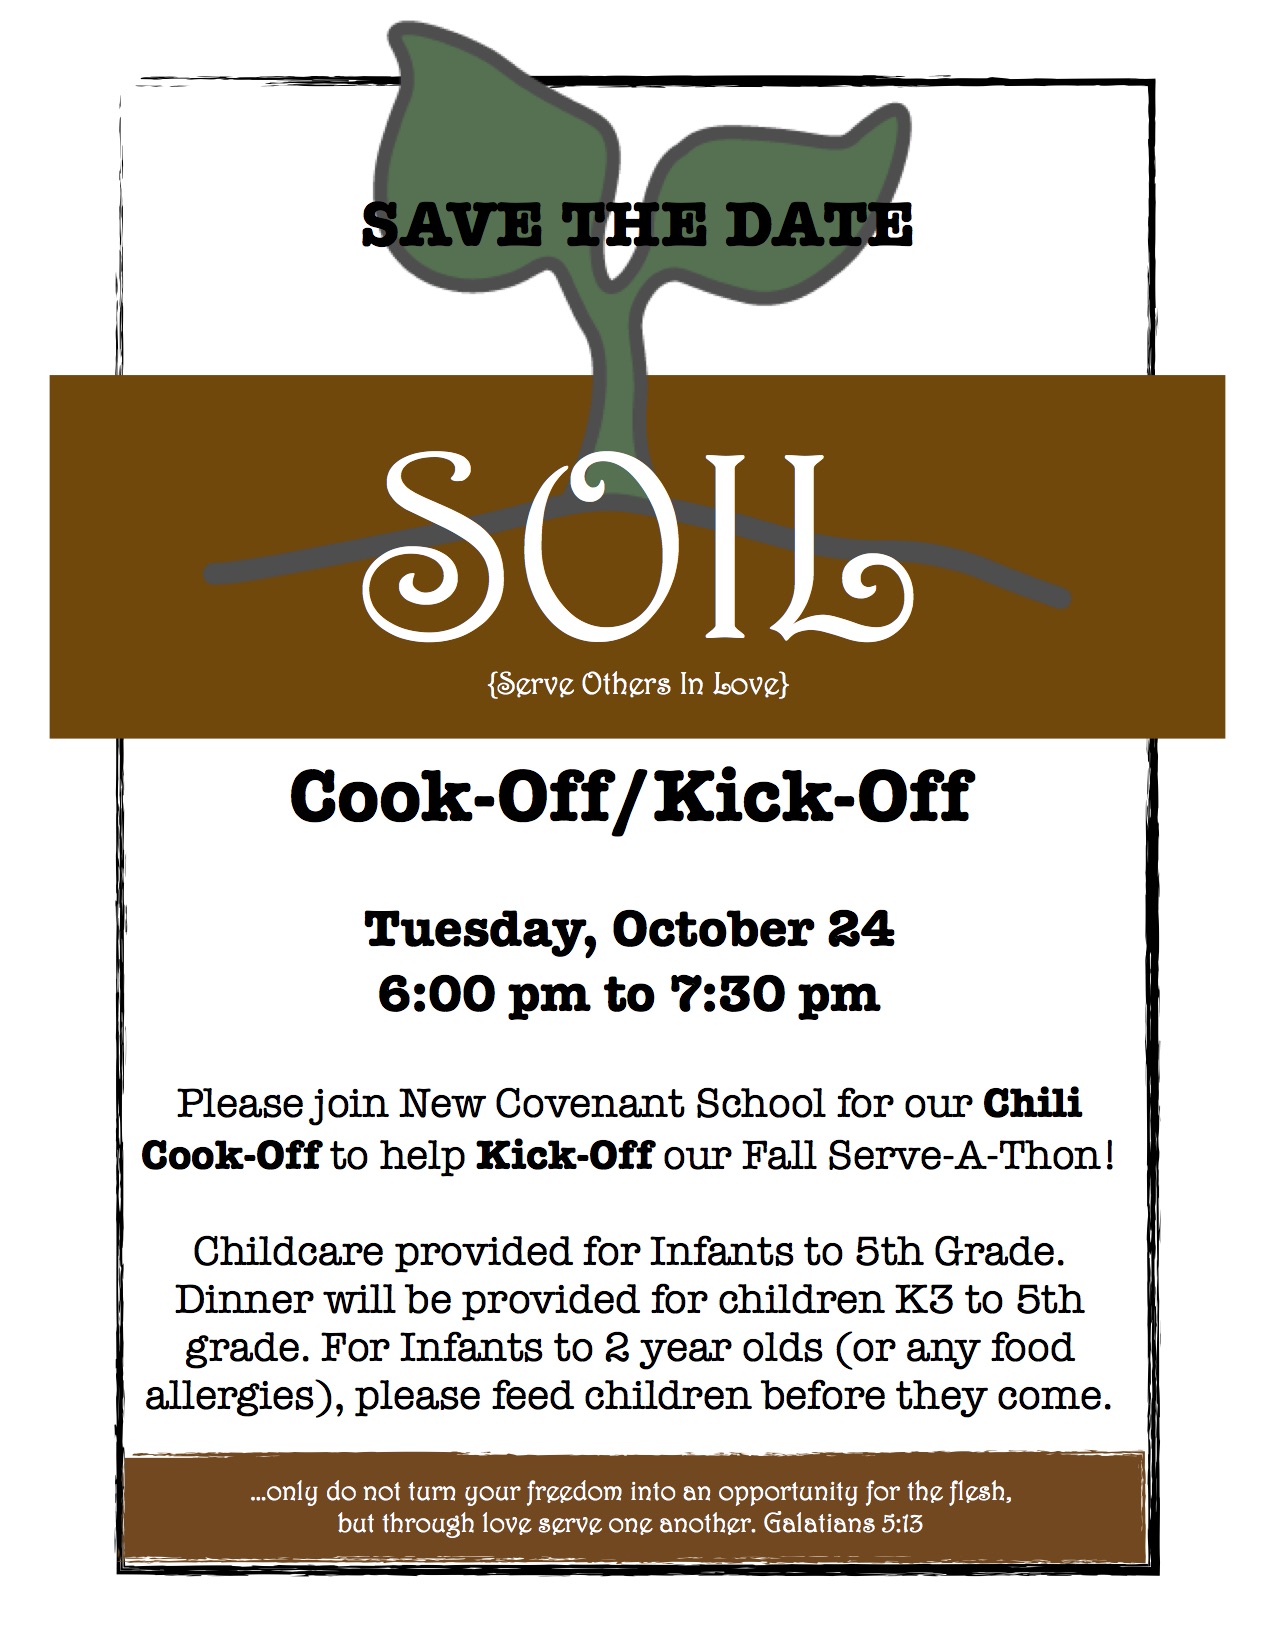 SOIL Save the Date